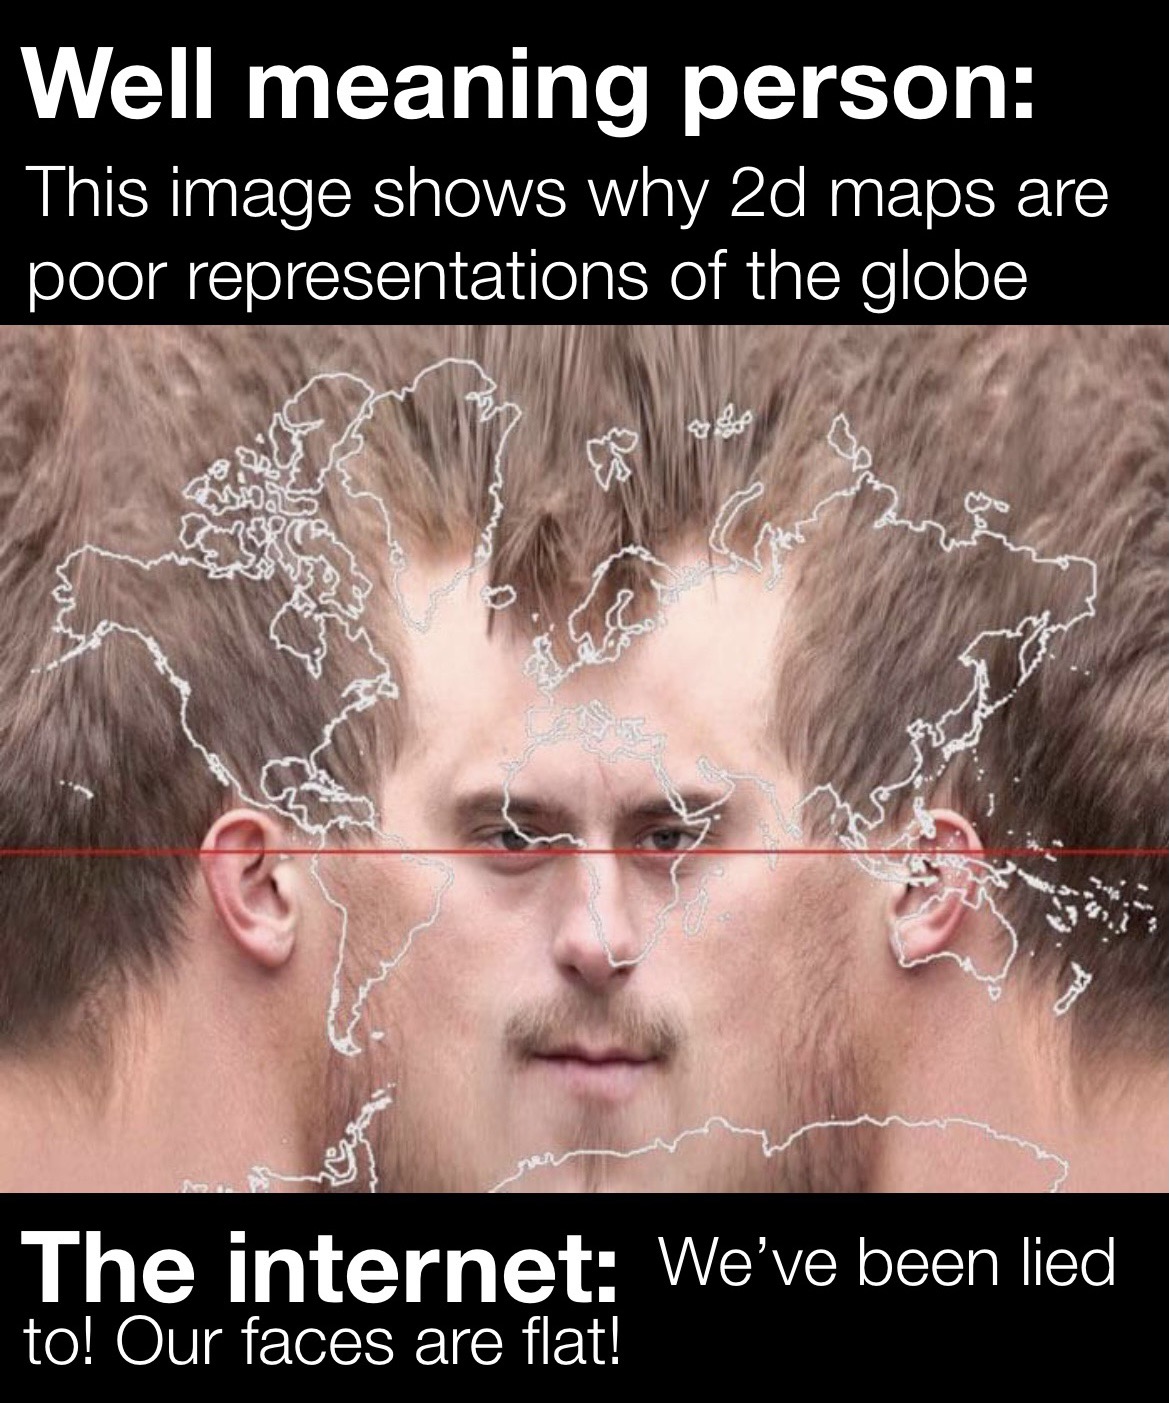 human face mercator projection - Well meaning person This image shows why 2d maps are poor representations of the globe con A The internet We've been lied to! Our faces are flat!